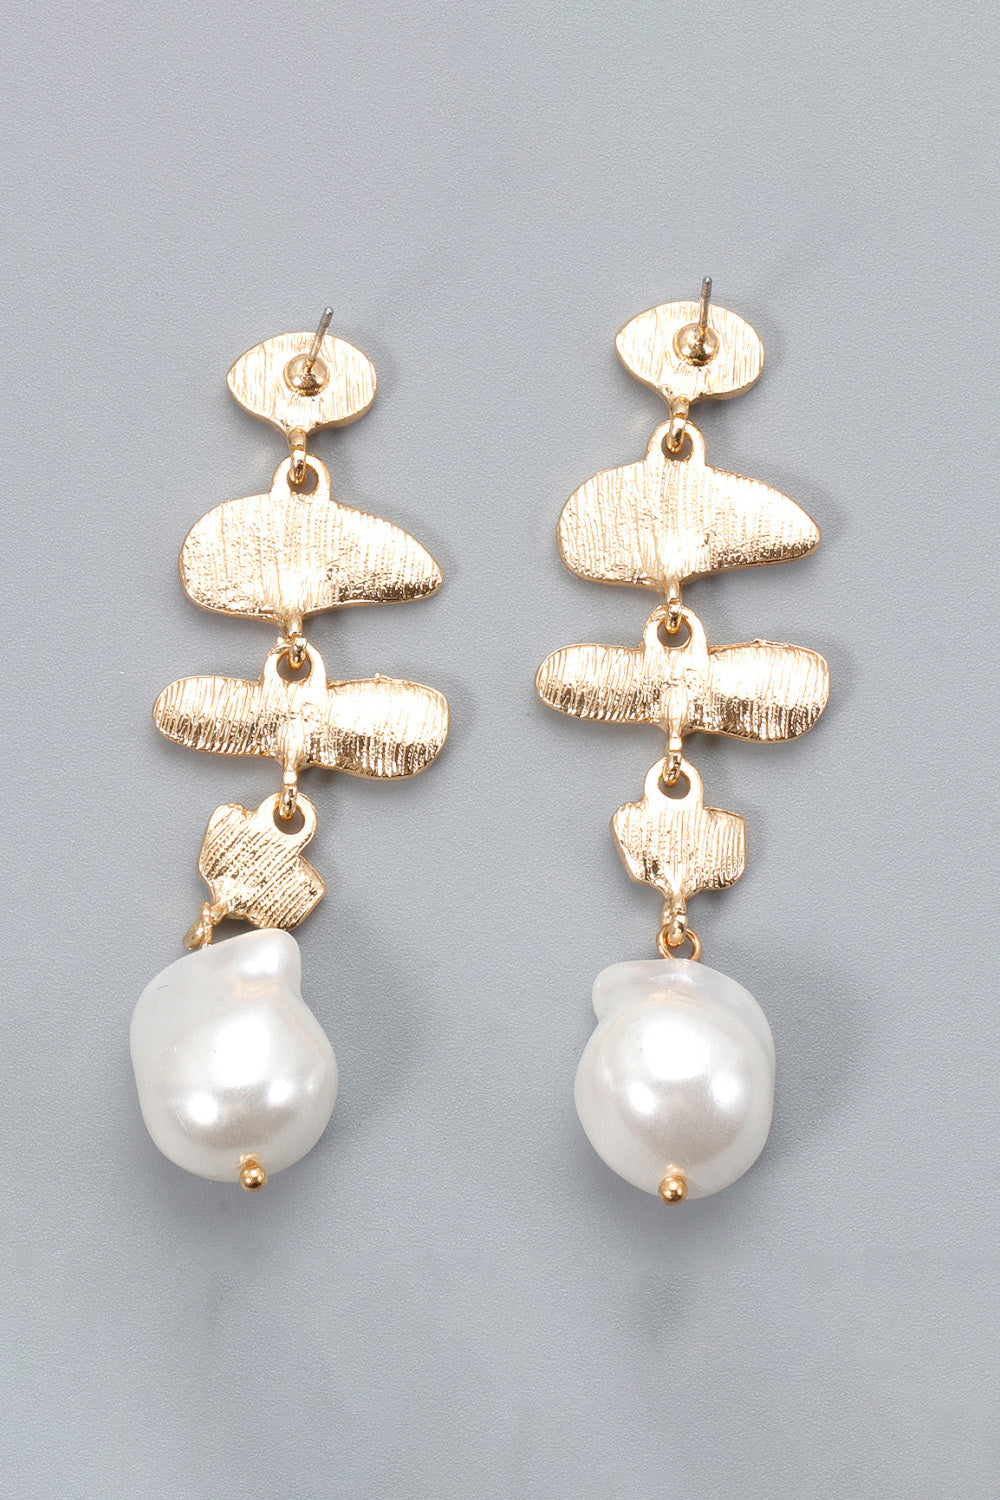 Gray Abnormal Shpae Zinc Alloy Synthetic Pearl Dangle Earrings Sentient Beauty Fashions jewelry